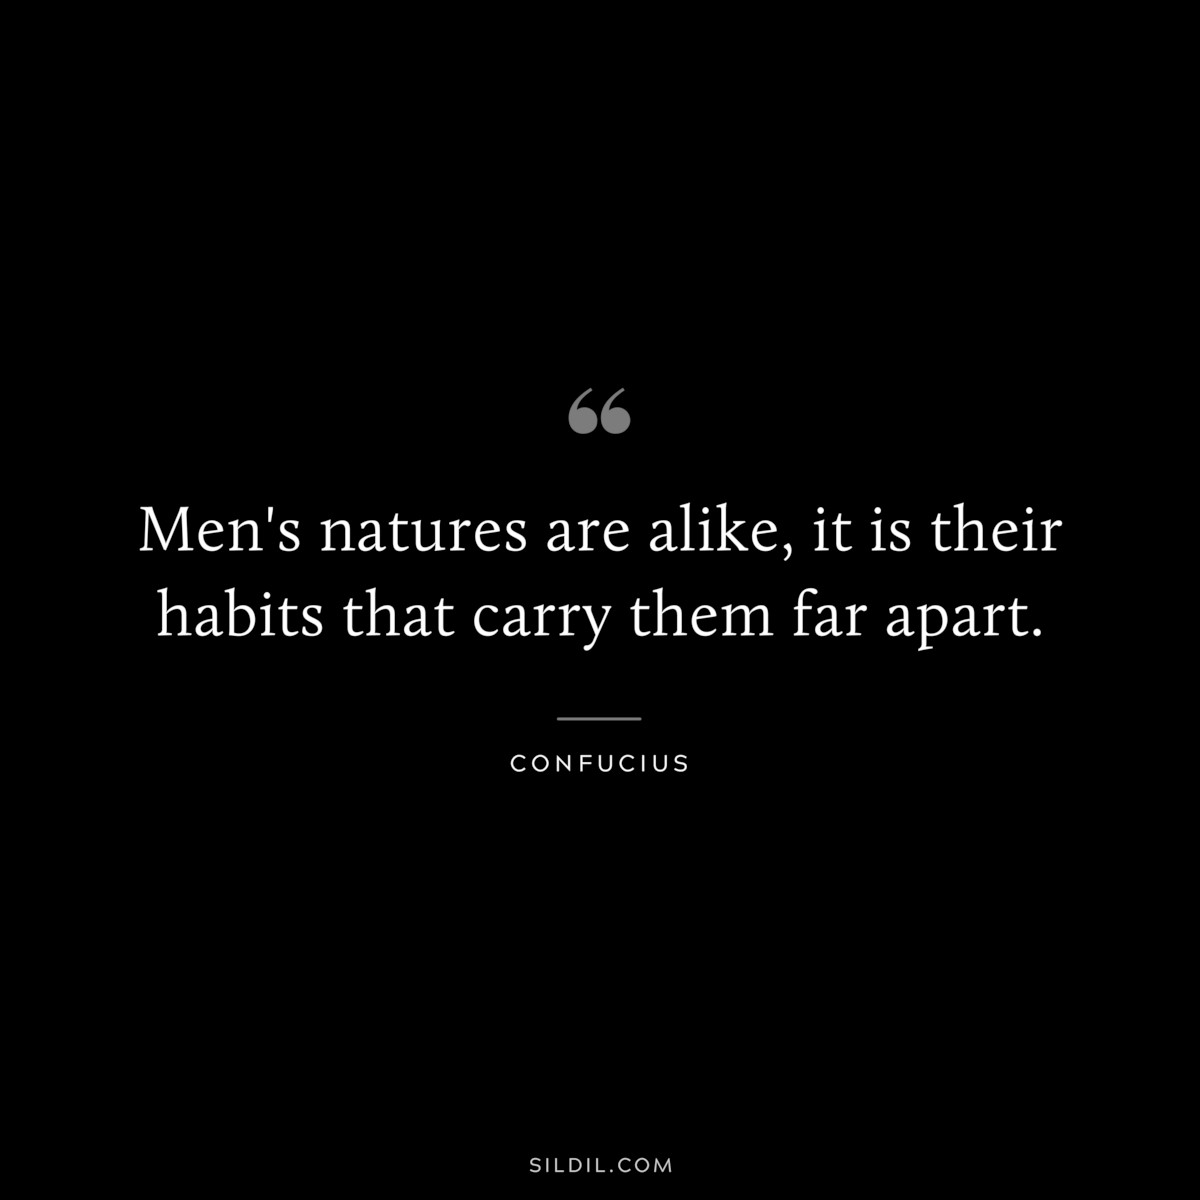 Men's natures are alike, it is their habits that carry them far apart. ― Confucius